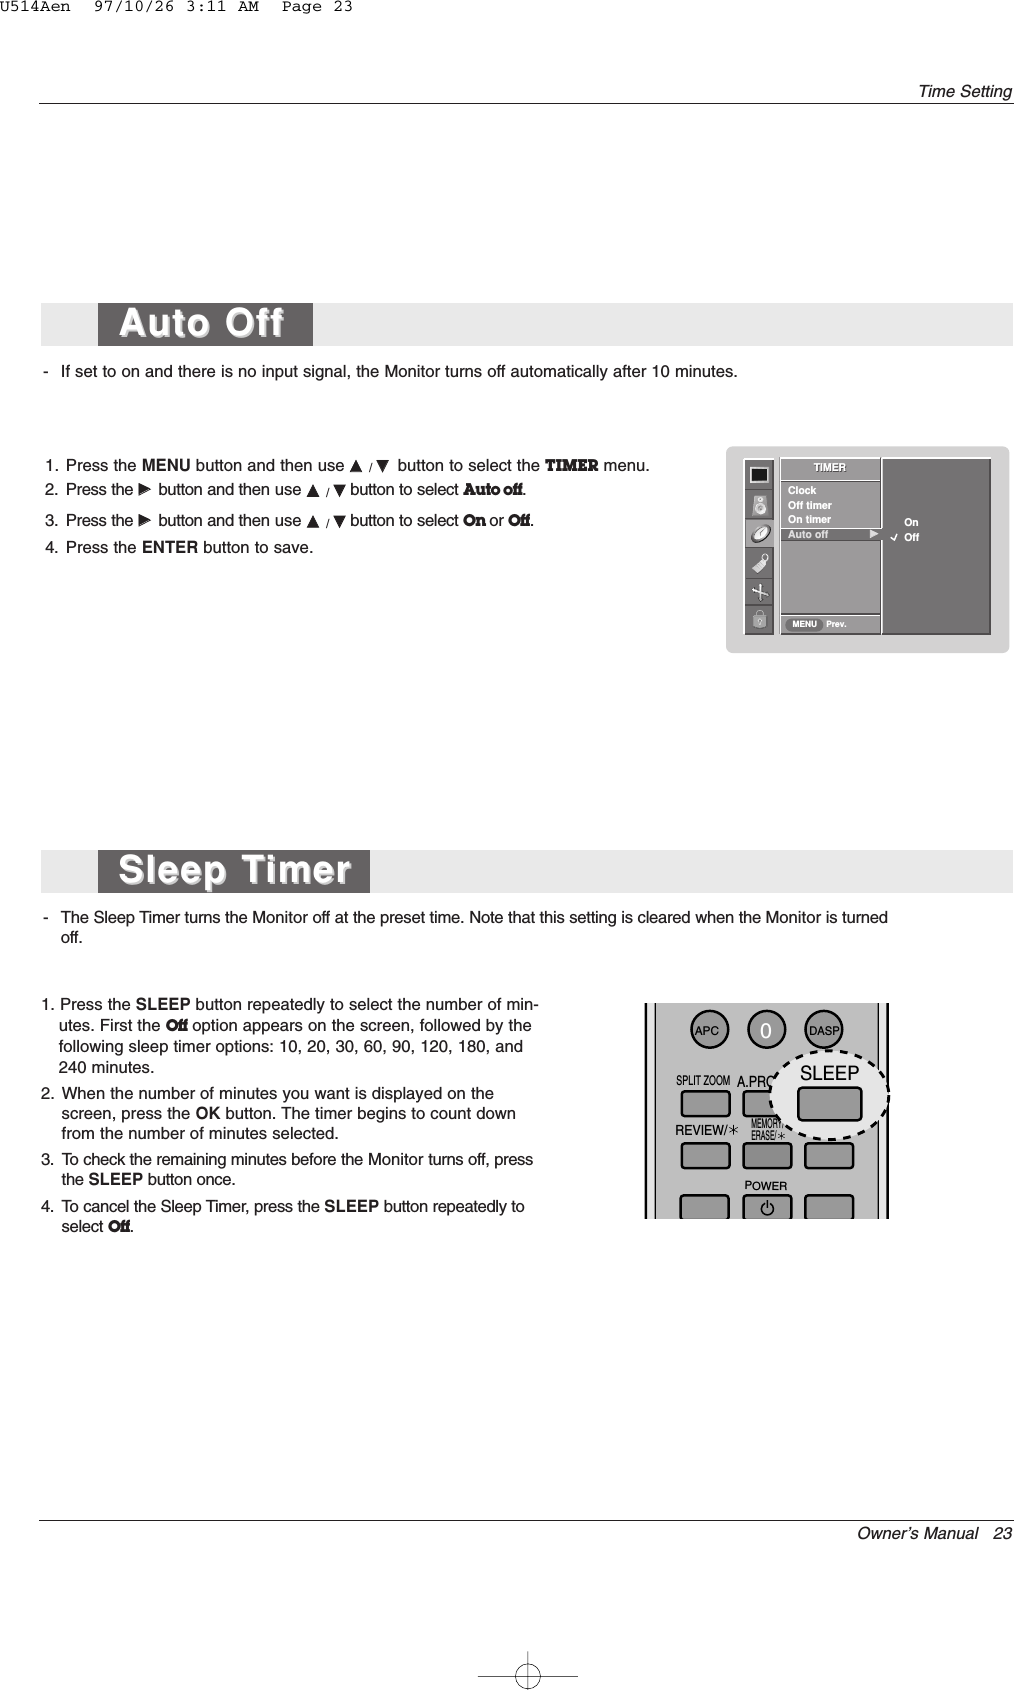 Owner’s Manual   23Time Setting- If set to on and there is no input signal, the Monitor turns off automatically after 10 minutes.1. Press the MENU button and then use DD  / EEbutton to select the TIMER menu.2. Press the GGbutton and then use DD  / EEbutton to select Auto off.3. Press the GGbutton and then use DD  / EEbutton to select On or Off.4. Press the ENTER button to save.- The Sleep Timer turns the Monitor off at the preset time. Note that this setting is cleared when the Monitor is turnedoff.1. Press the SLEEP button repeatedly to select the number of min-utes. First the Off option appears on the screen, followed by thefollowing sleep timer options: 10, 20, 30, 60, 90, 120, 180, and240 minutes.2. When the number of minutes you want is displayed on thescreen, press the OK button. The timer begins to count downfrom the number of minutes selected.3. To check the remaining minutes before the Monitor turns off, pressthe SLEEP button once.4. To cancel the Sleep Timer, press the SLEEP button repeatedly toselect Off.TIMERPrev.ClockOff timerOn timerAuto off             GGTIMERMENUOn            OffSleep TSleep TimerimerAuto Off Auto Off 0APCDASPSPLIT ZOOMSLEEPMEMORY/ERASE/REVIEW/FCR/A.PROG/POWERSLEEPU514Aen  97/10/26 3:11 AM  Page 23